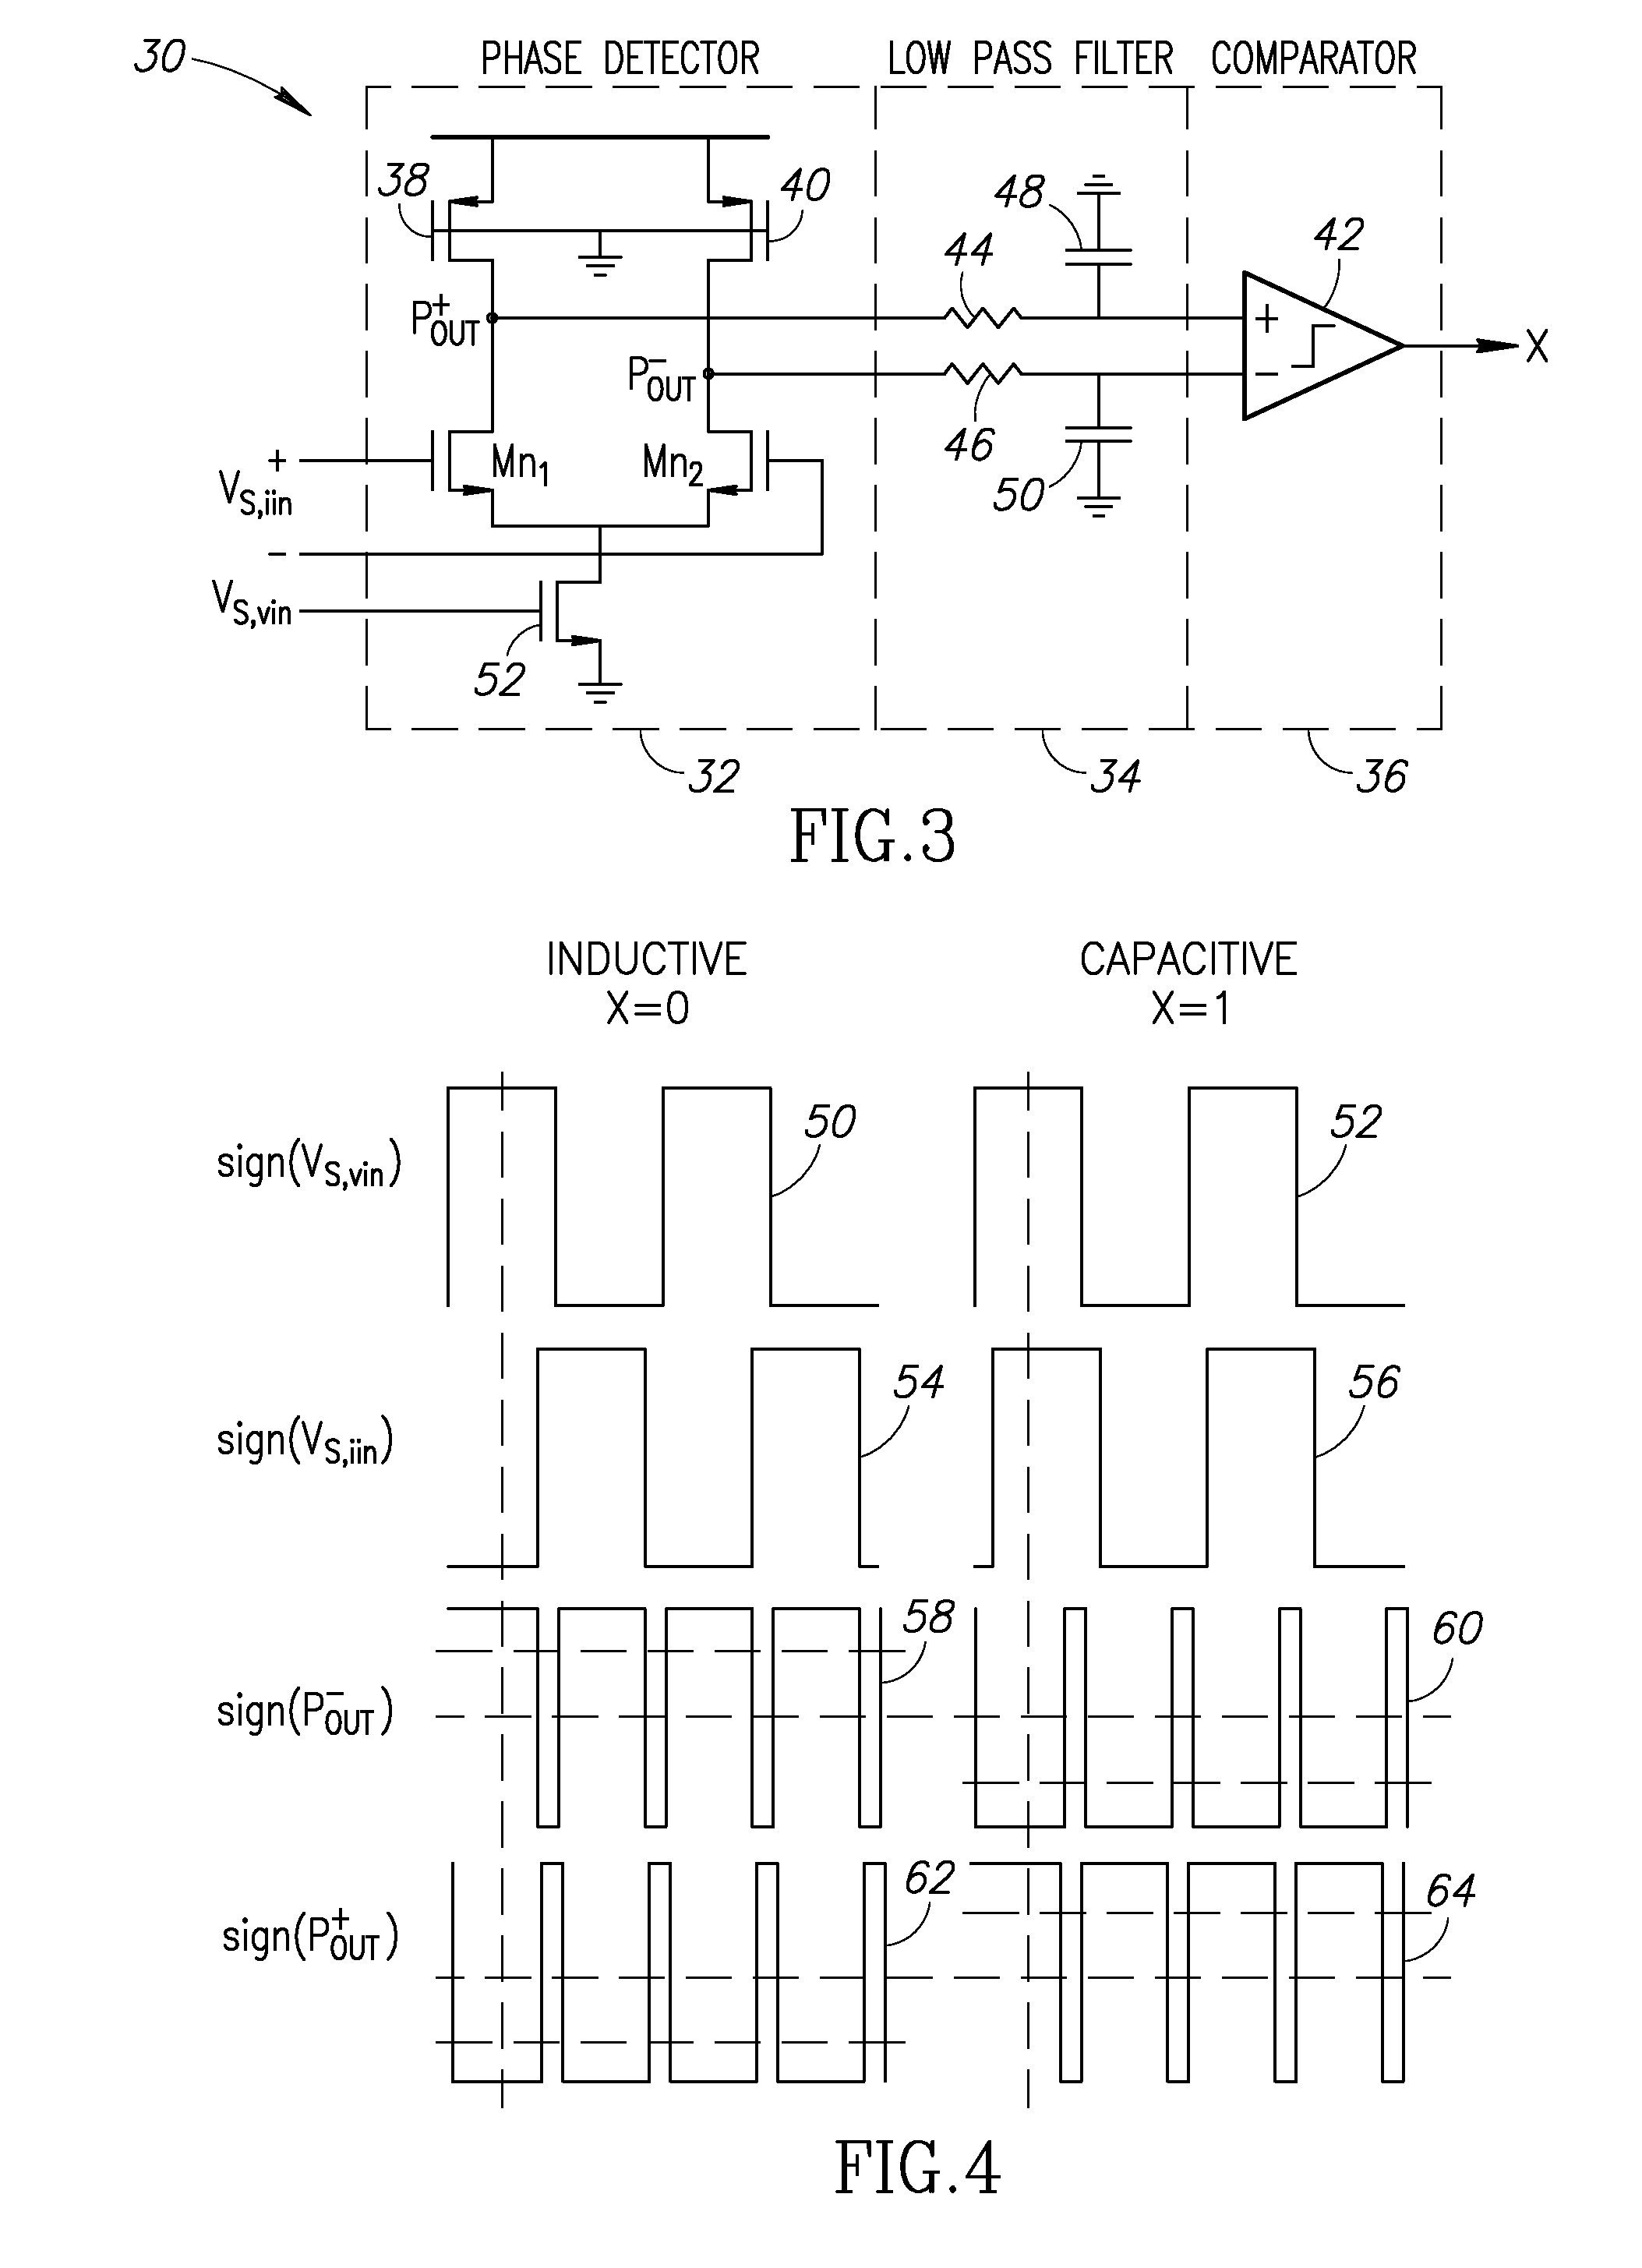 CMOS Tuner And Related Tuning Algorithm For A Passive Adaptive Antenna Matching Network Suitable For Use With Agile RF Transceivers